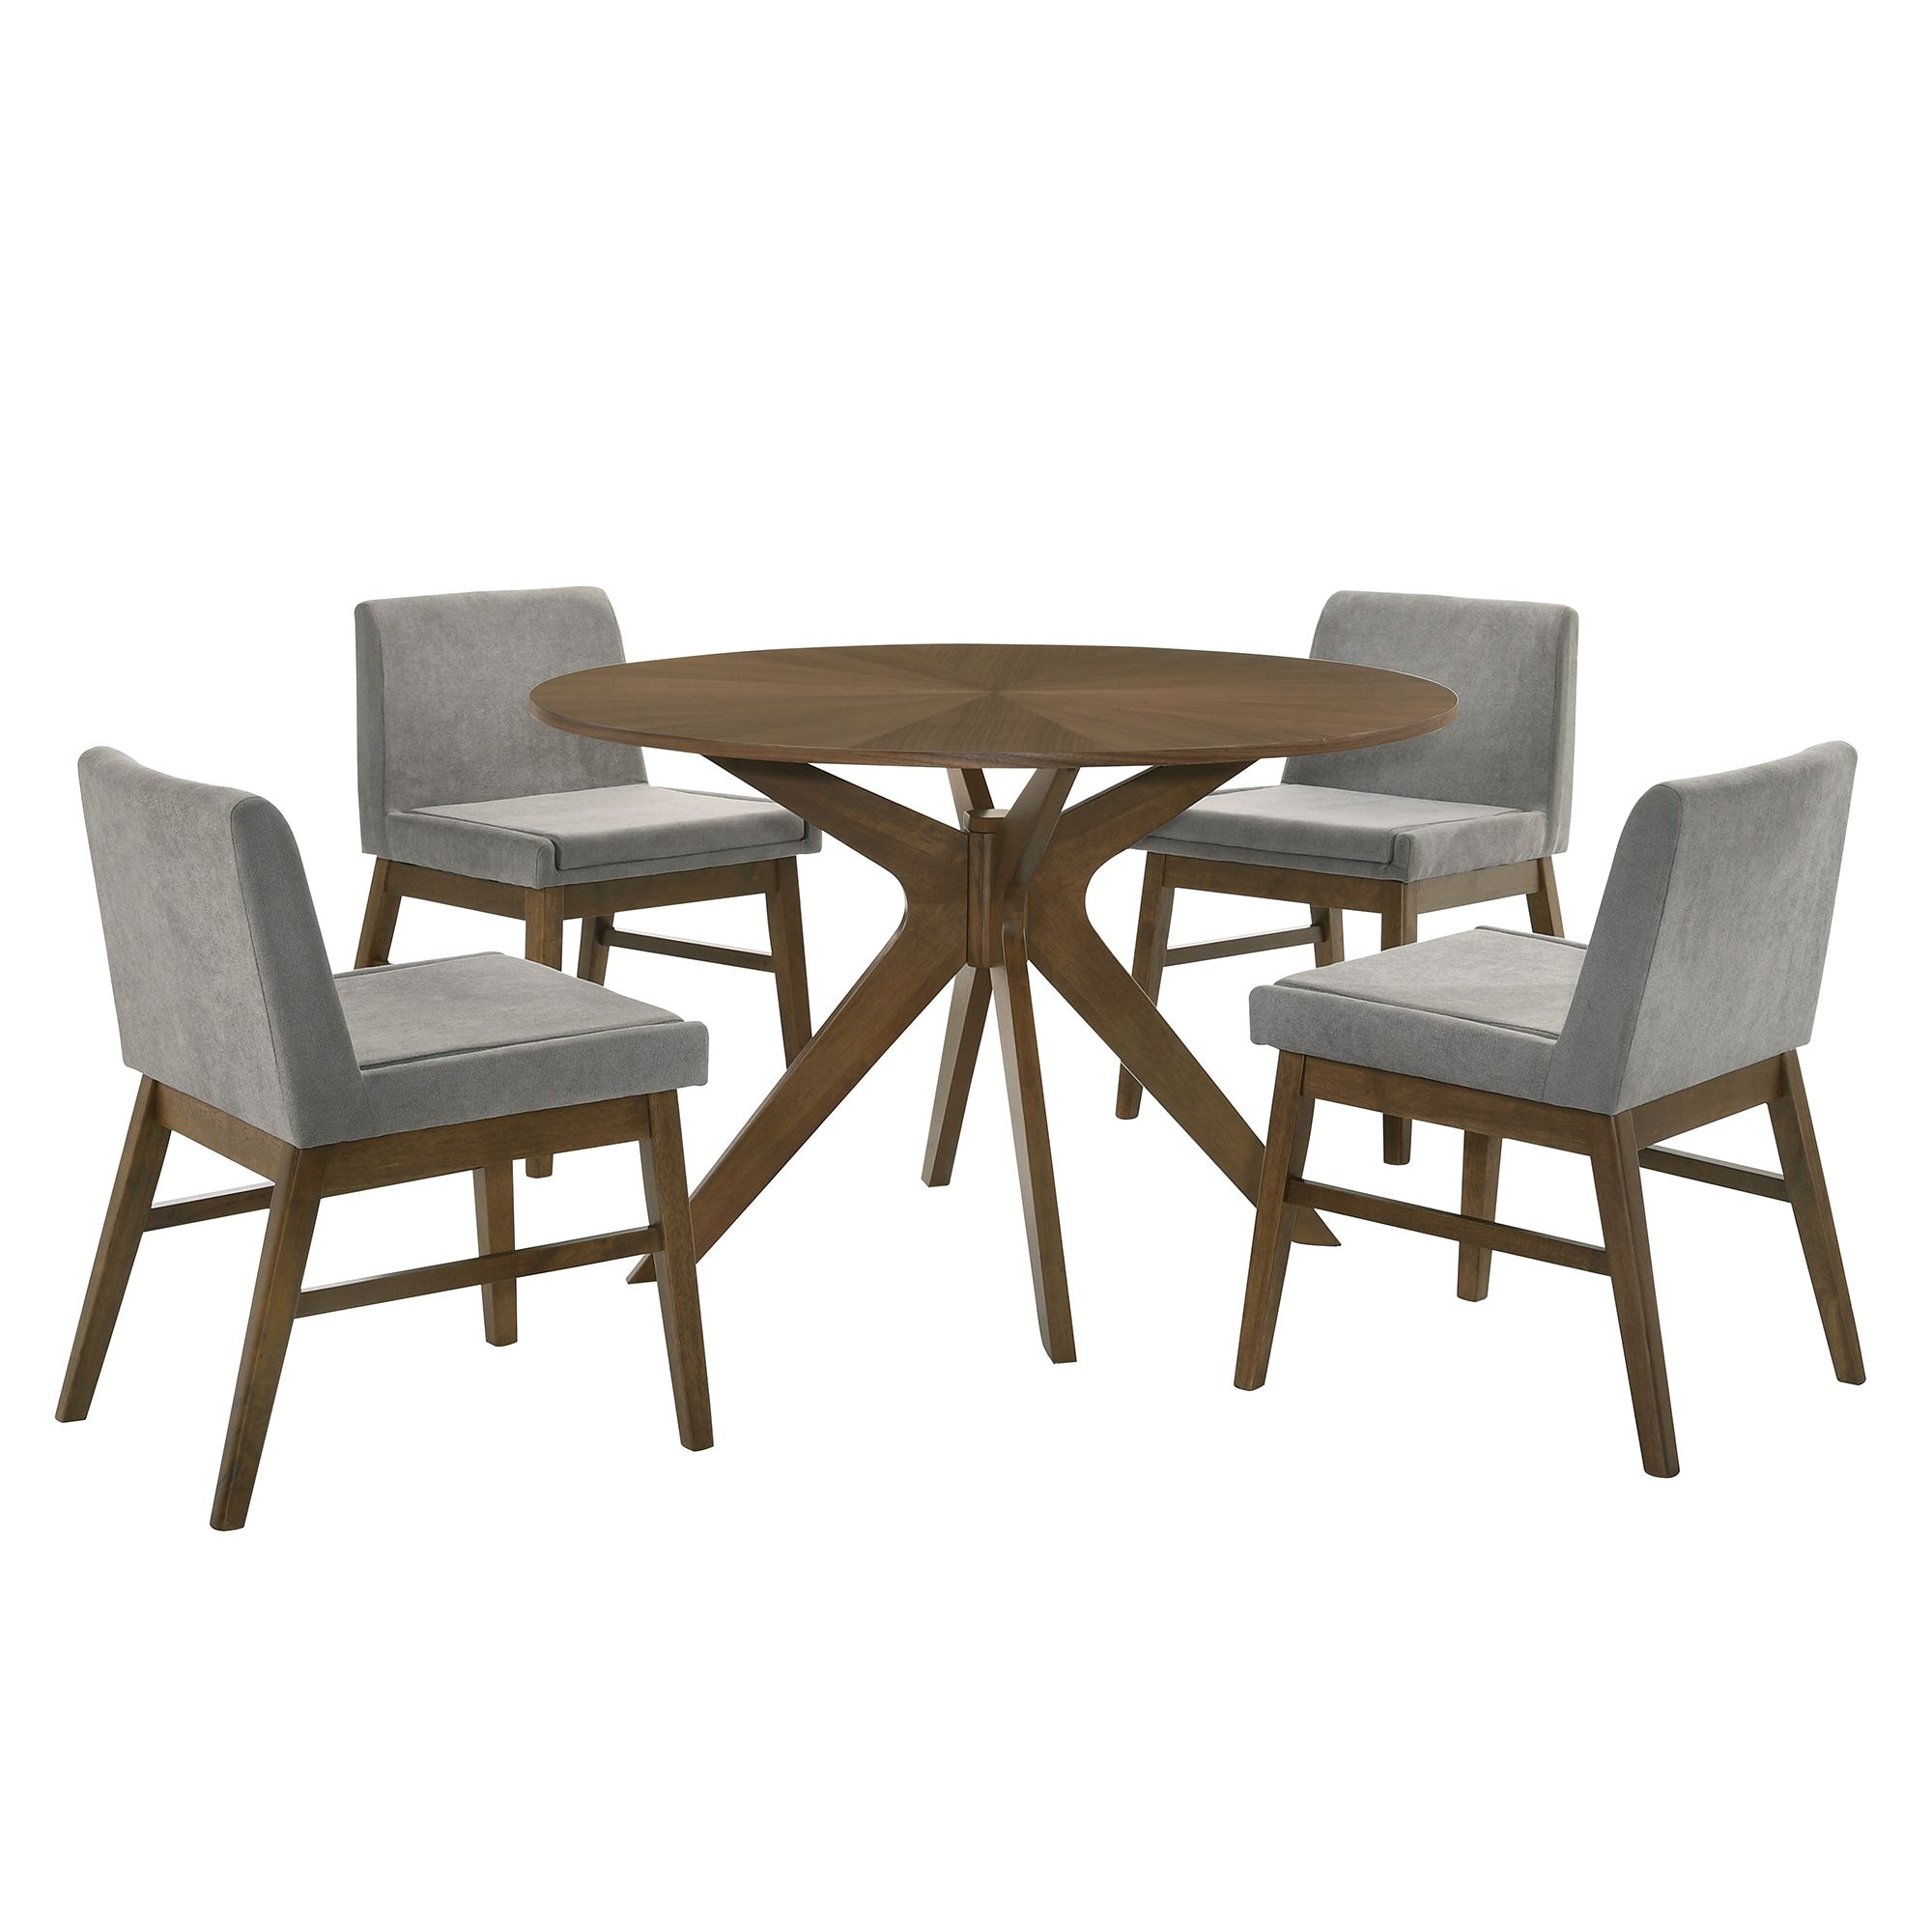 Wynden Walnut/Smoke Contemporary/Modern Dining Room Set with Round Table (Seats 4) in Brown | - Picket House Furnishings DWT100BL5PC